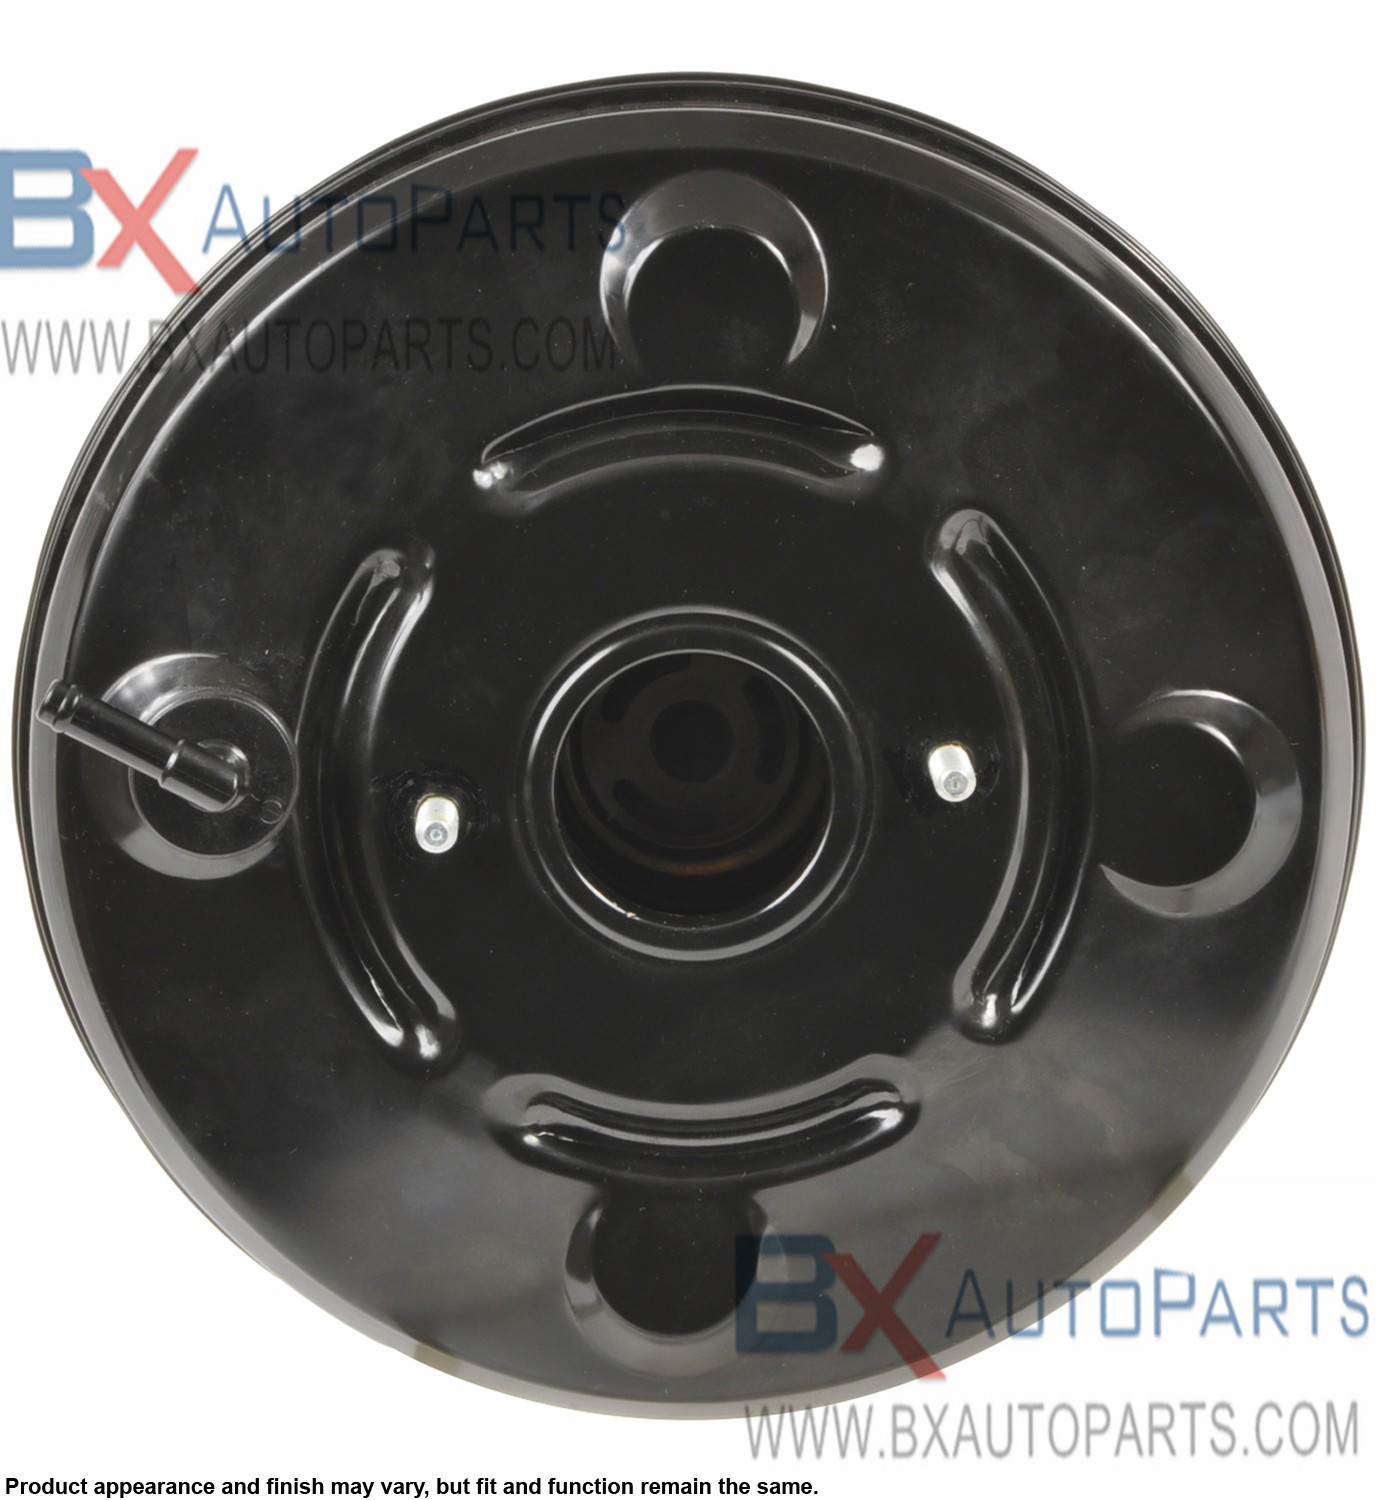 BRAKE BOOSTER FOR TOYOTA COROLLA 2008-2014 ZRE141 LHD 44610-12D21